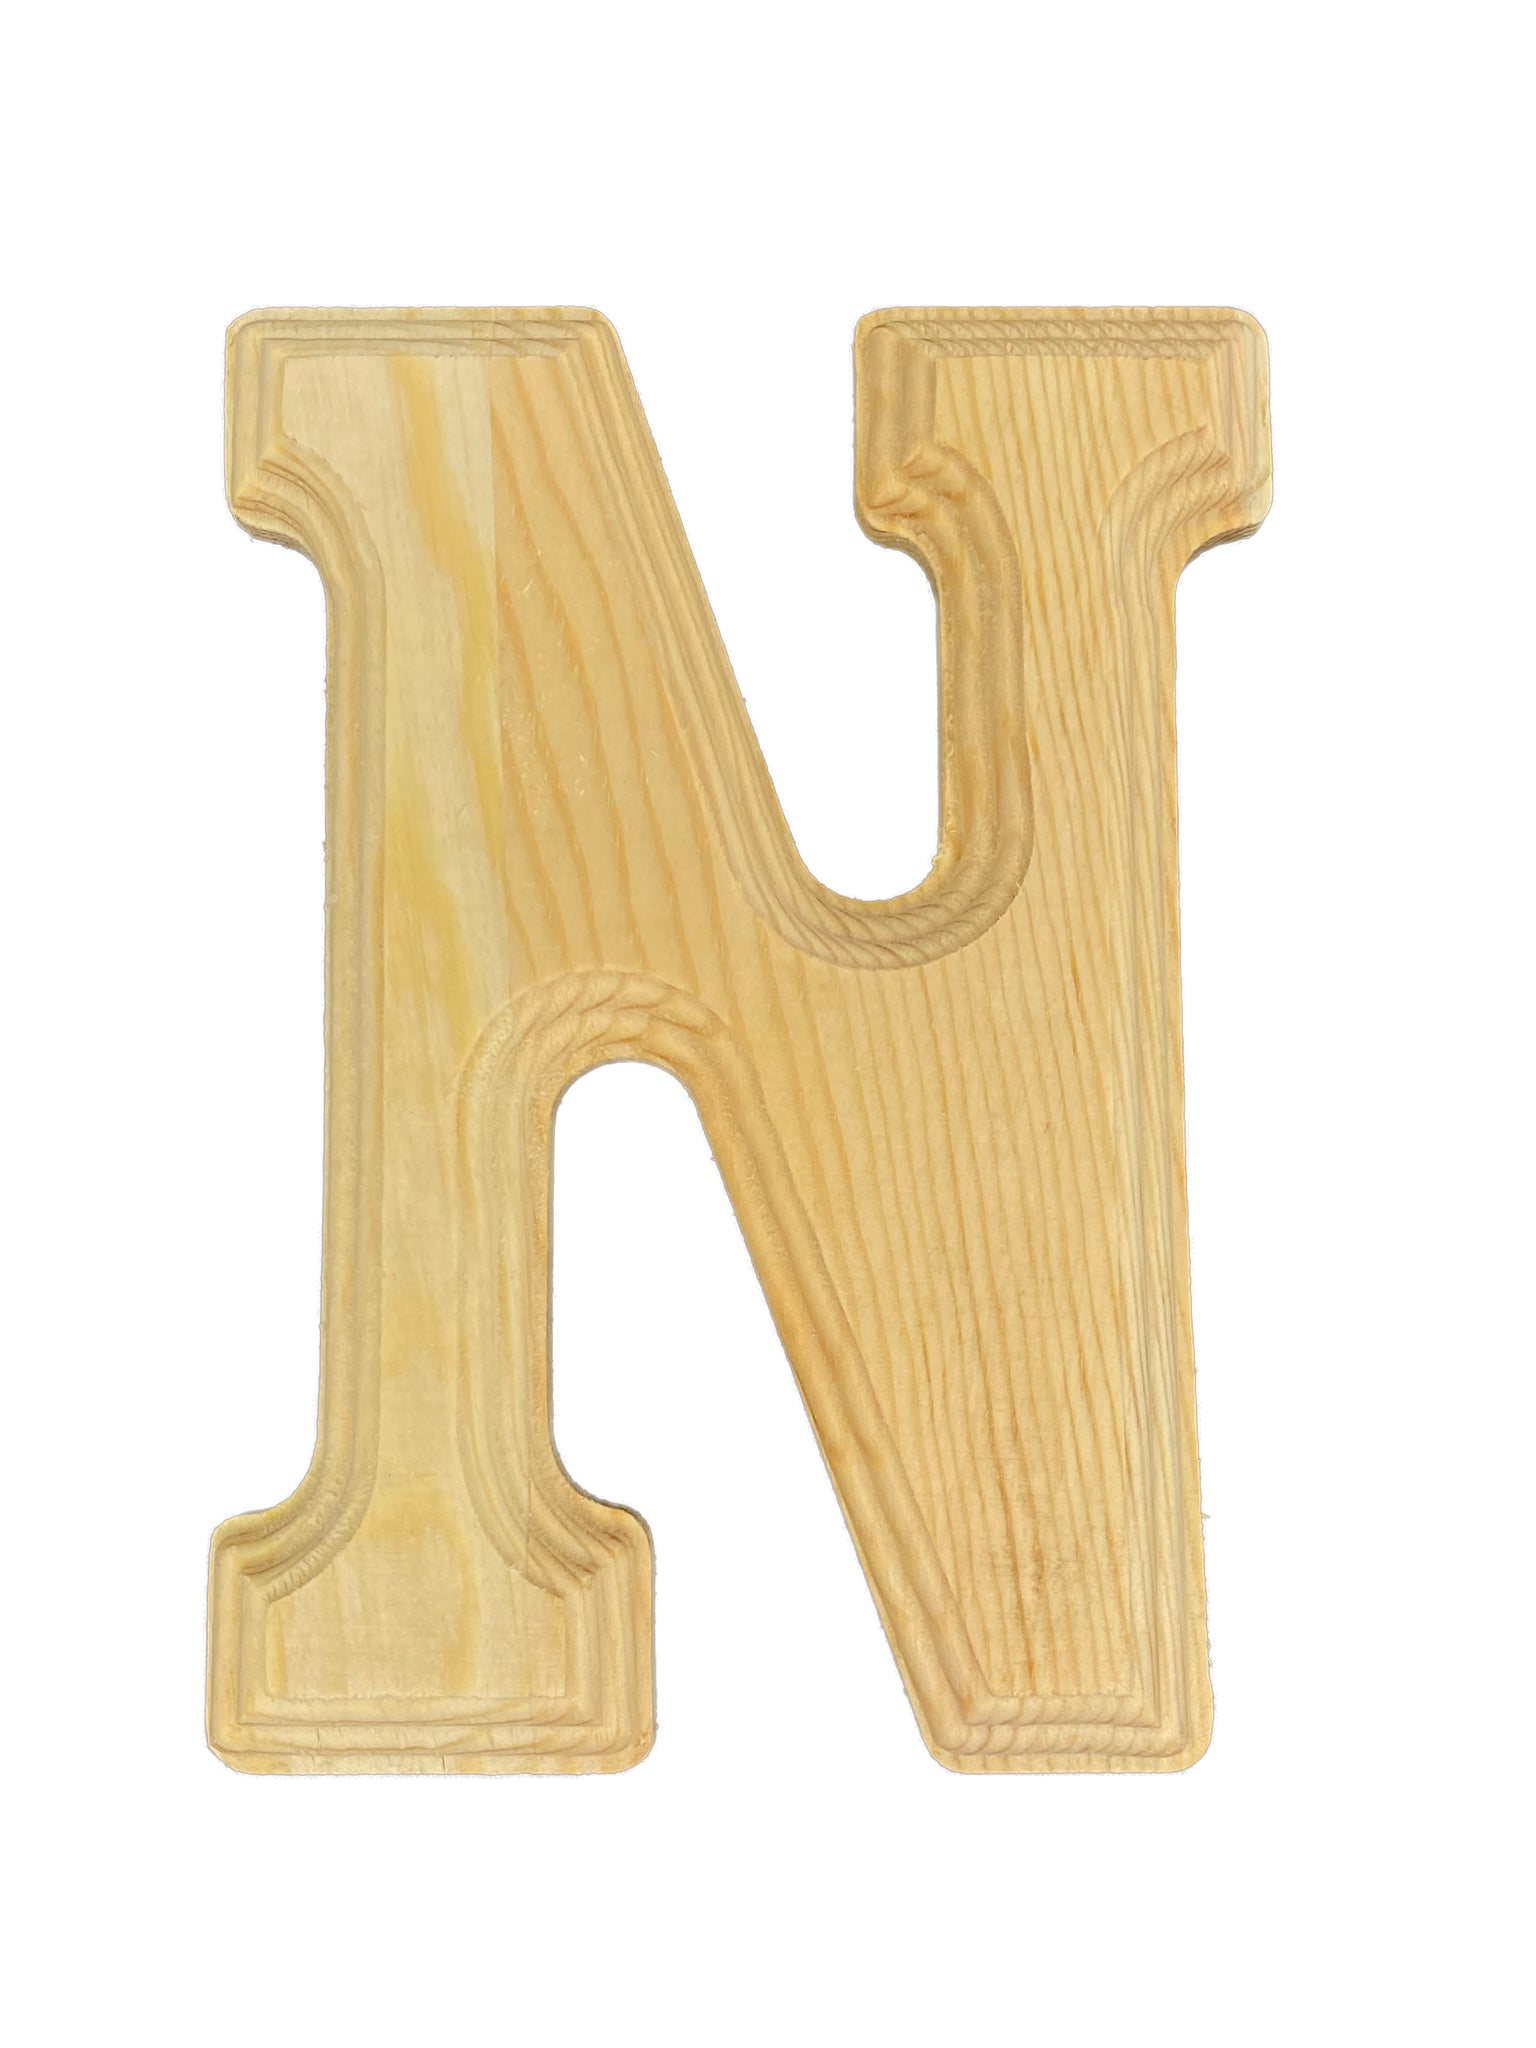 26 Pieces Wooden Alphabet Letters for Crafts, 6-Inch Indonesia